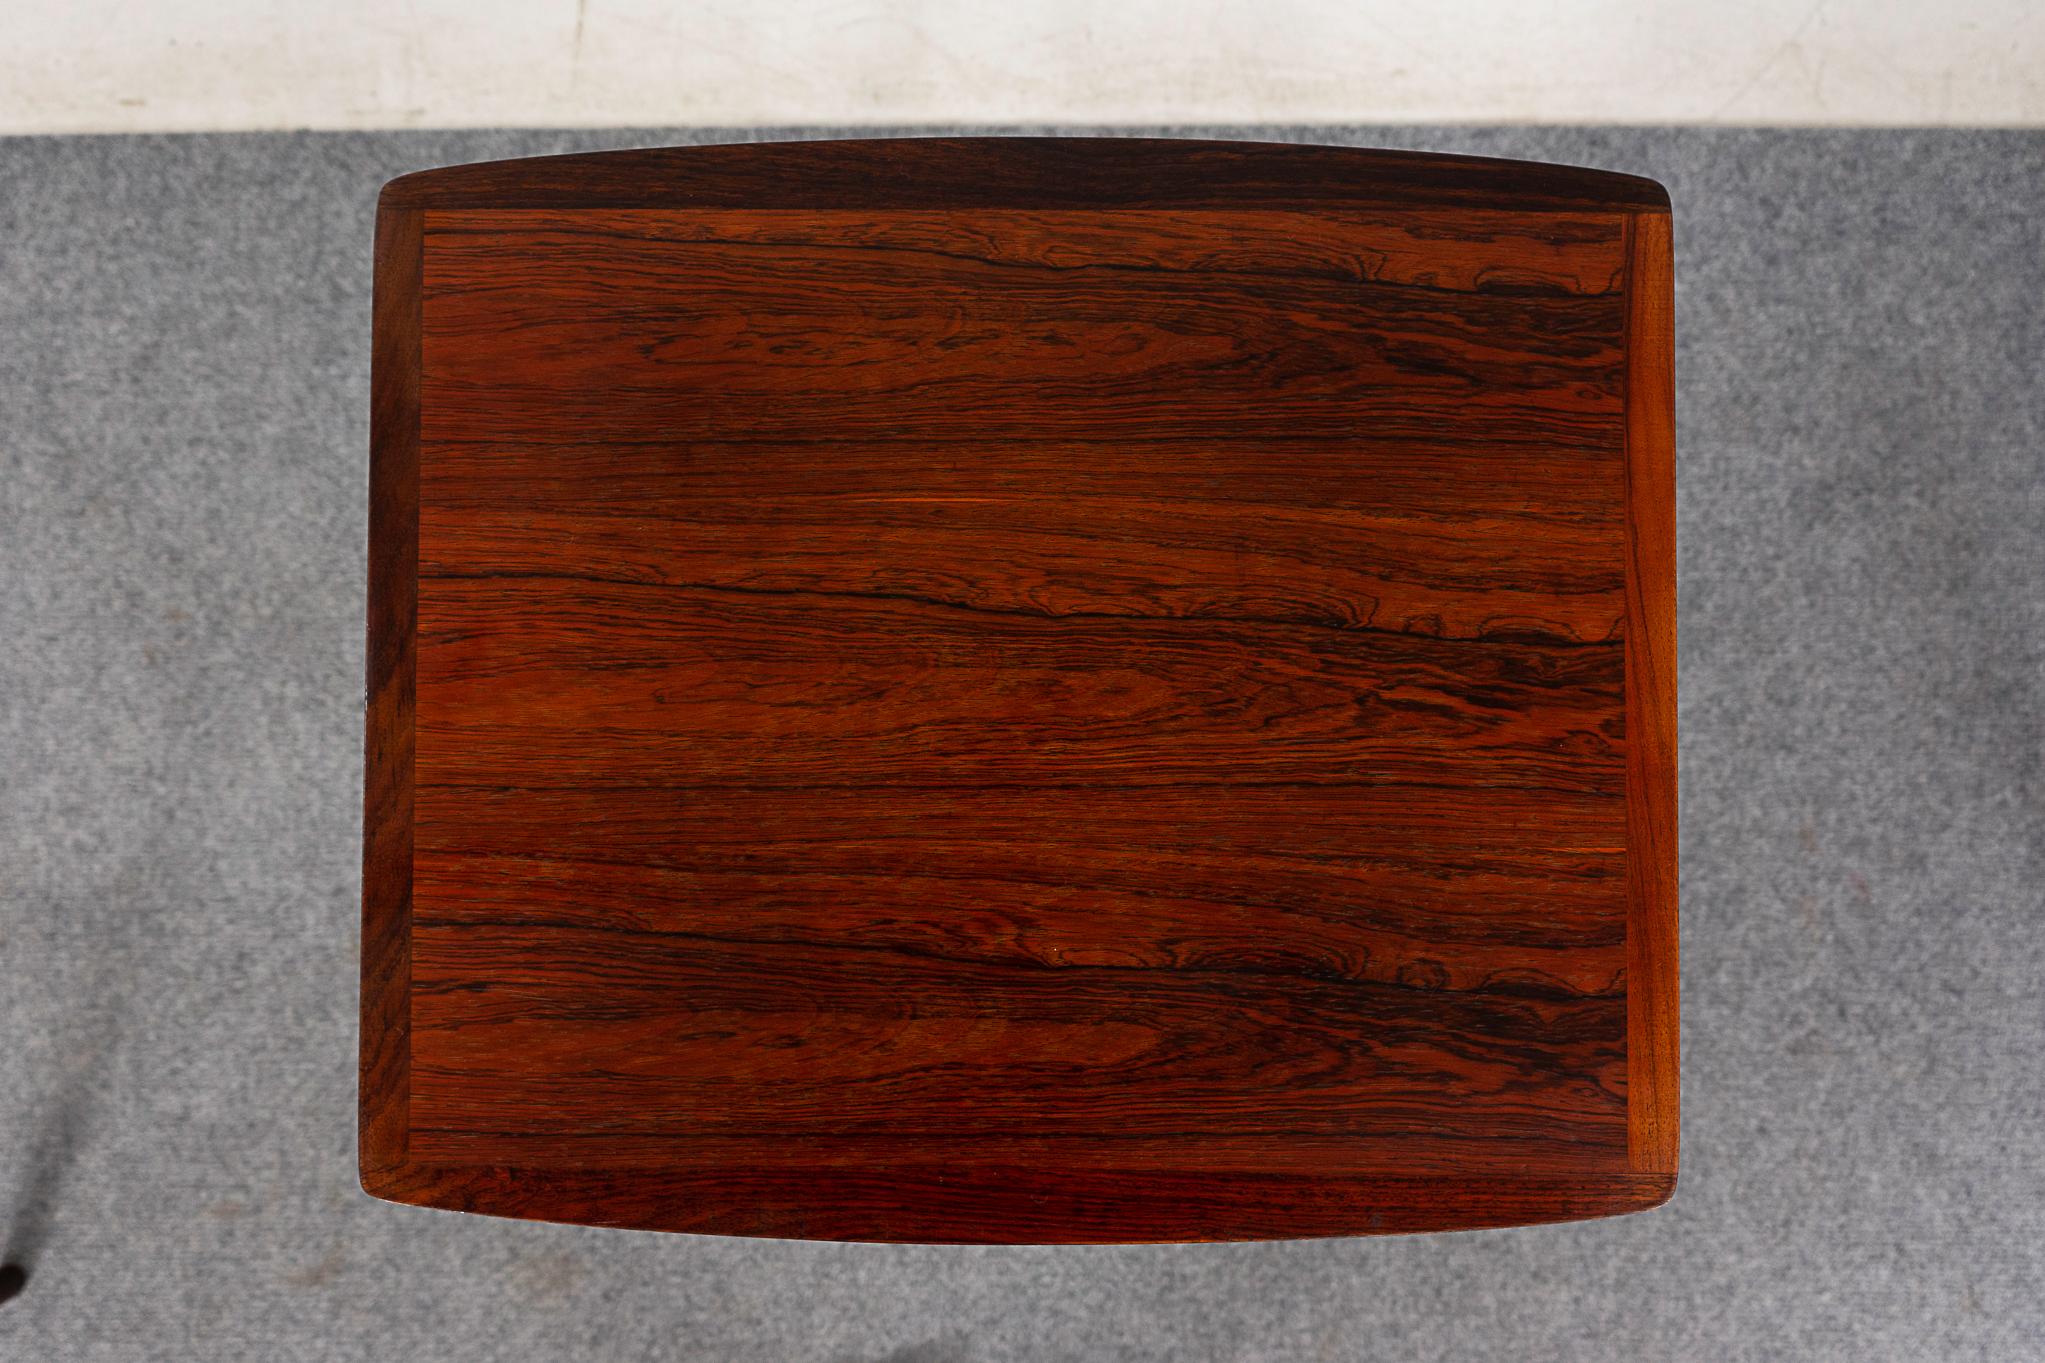 Danish Mid-Centruy Modern Rosewood Nesting Tables by Mobelintarsia For Sale 4